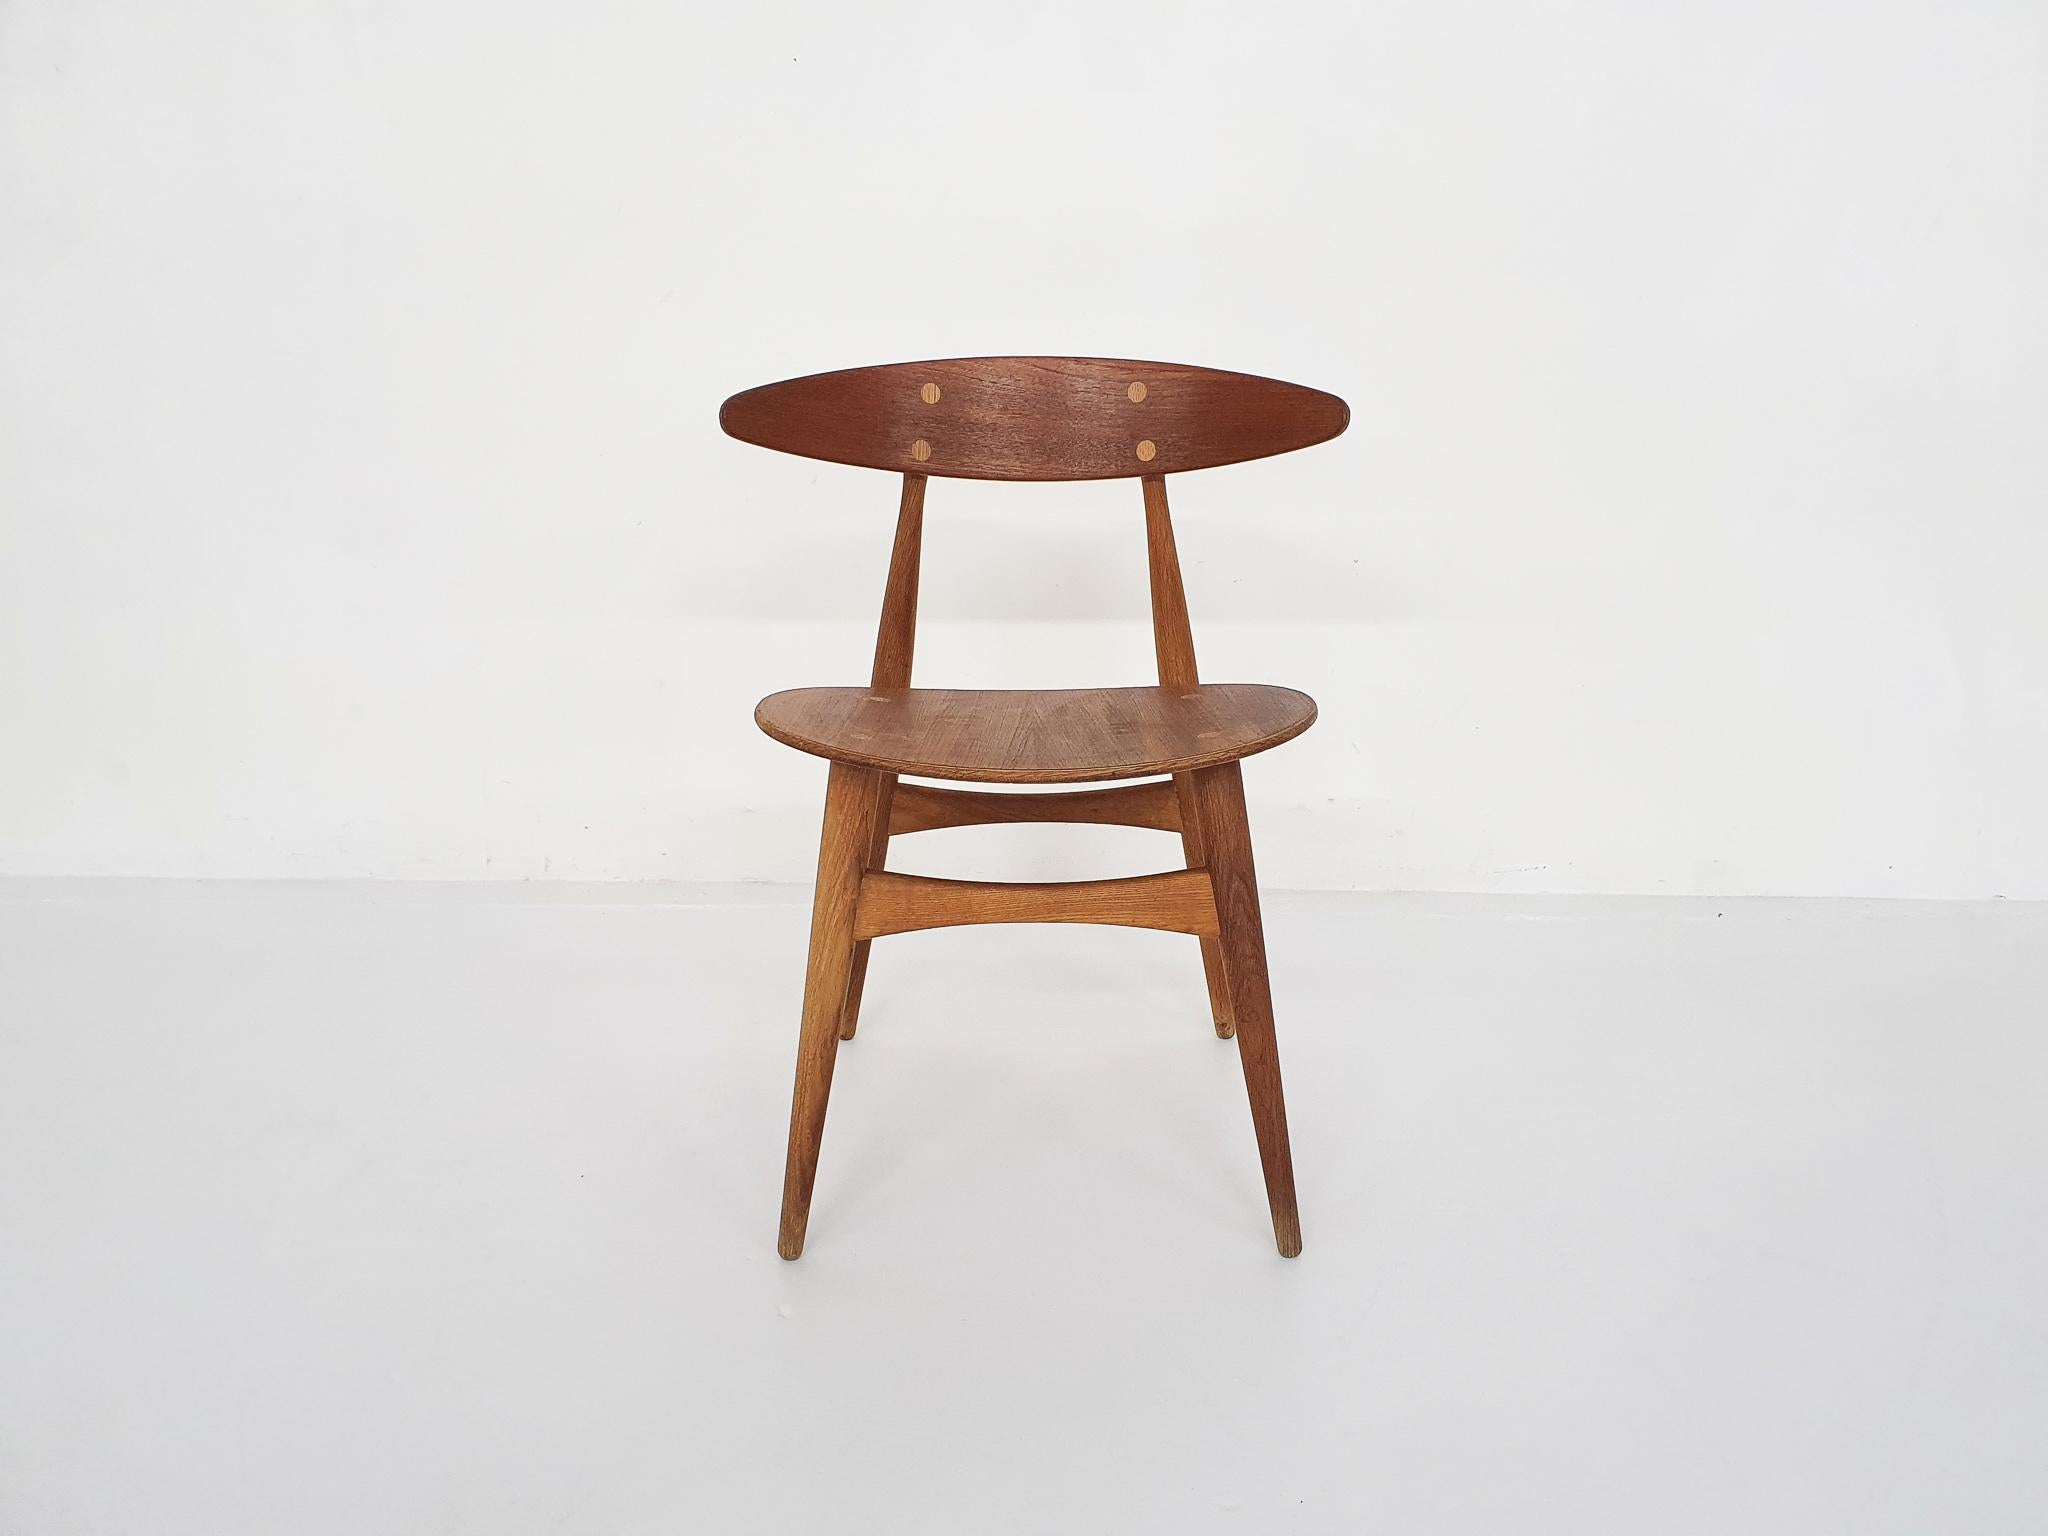 Vintage edition CH33T teak dining chair by Hans Wegner for Carl Hansen and Son.